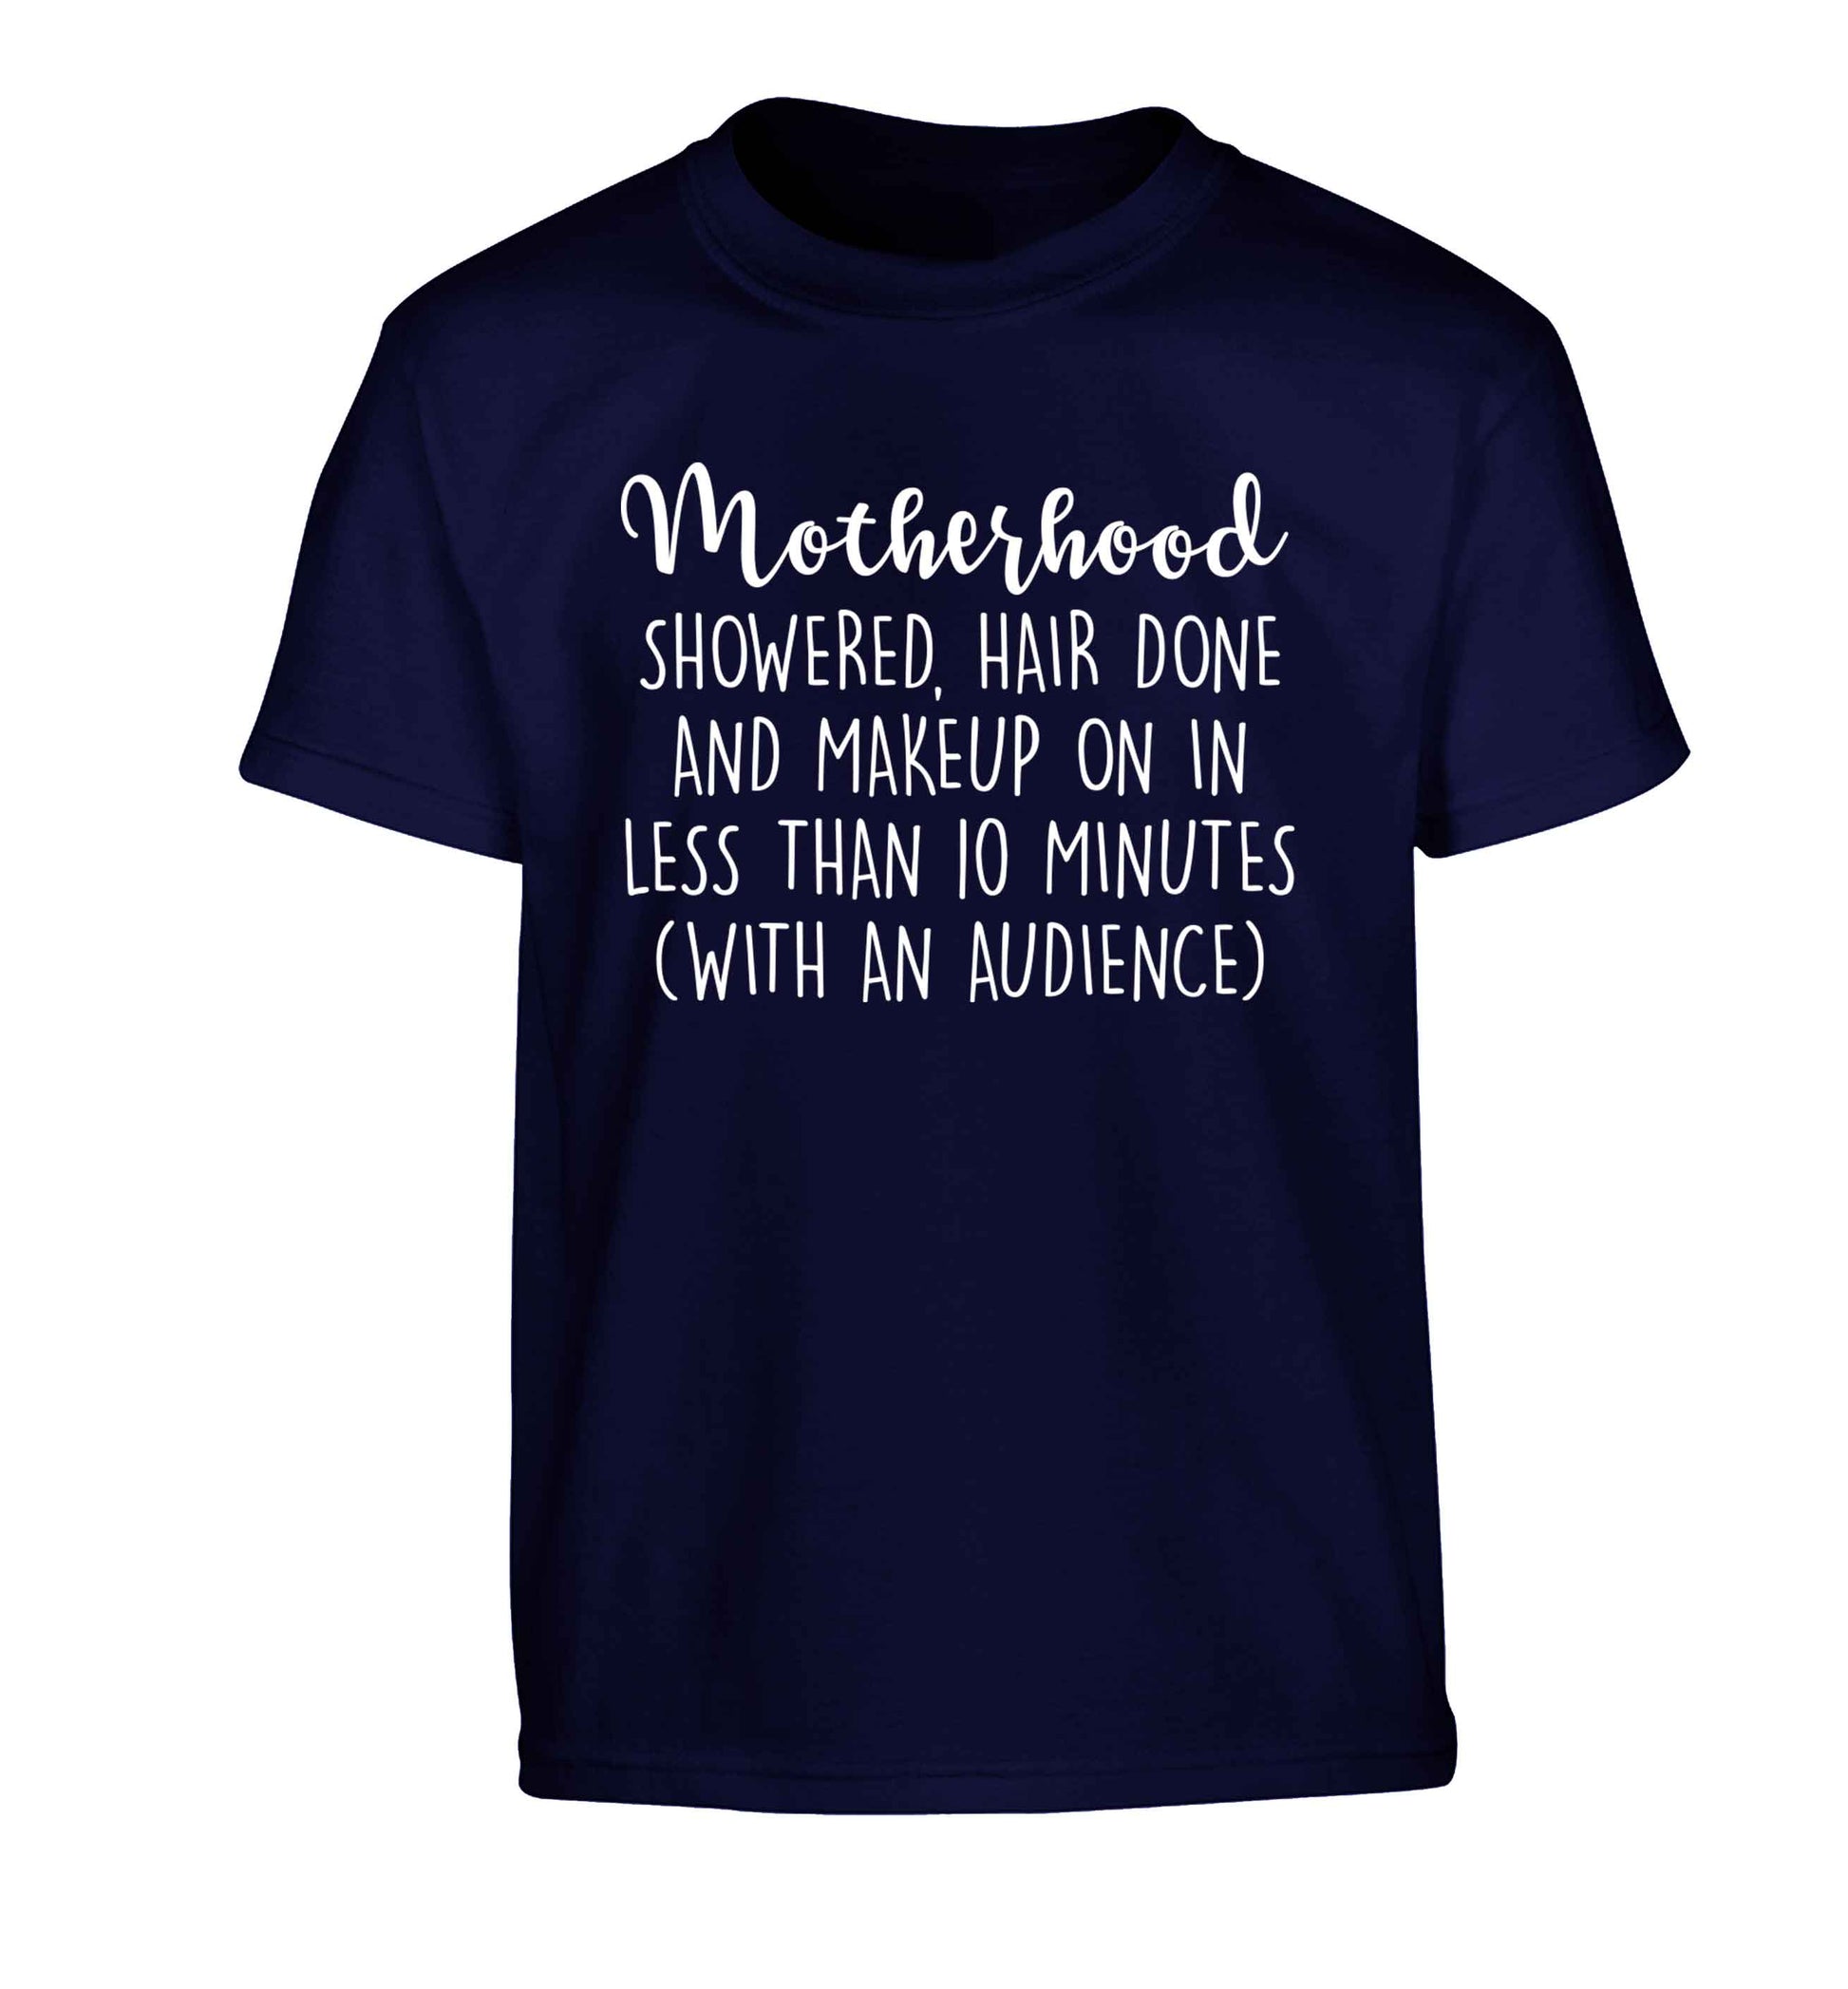 Motherhood, showered, hair done and makeup on Children's navy Tshirt 12-13 Years